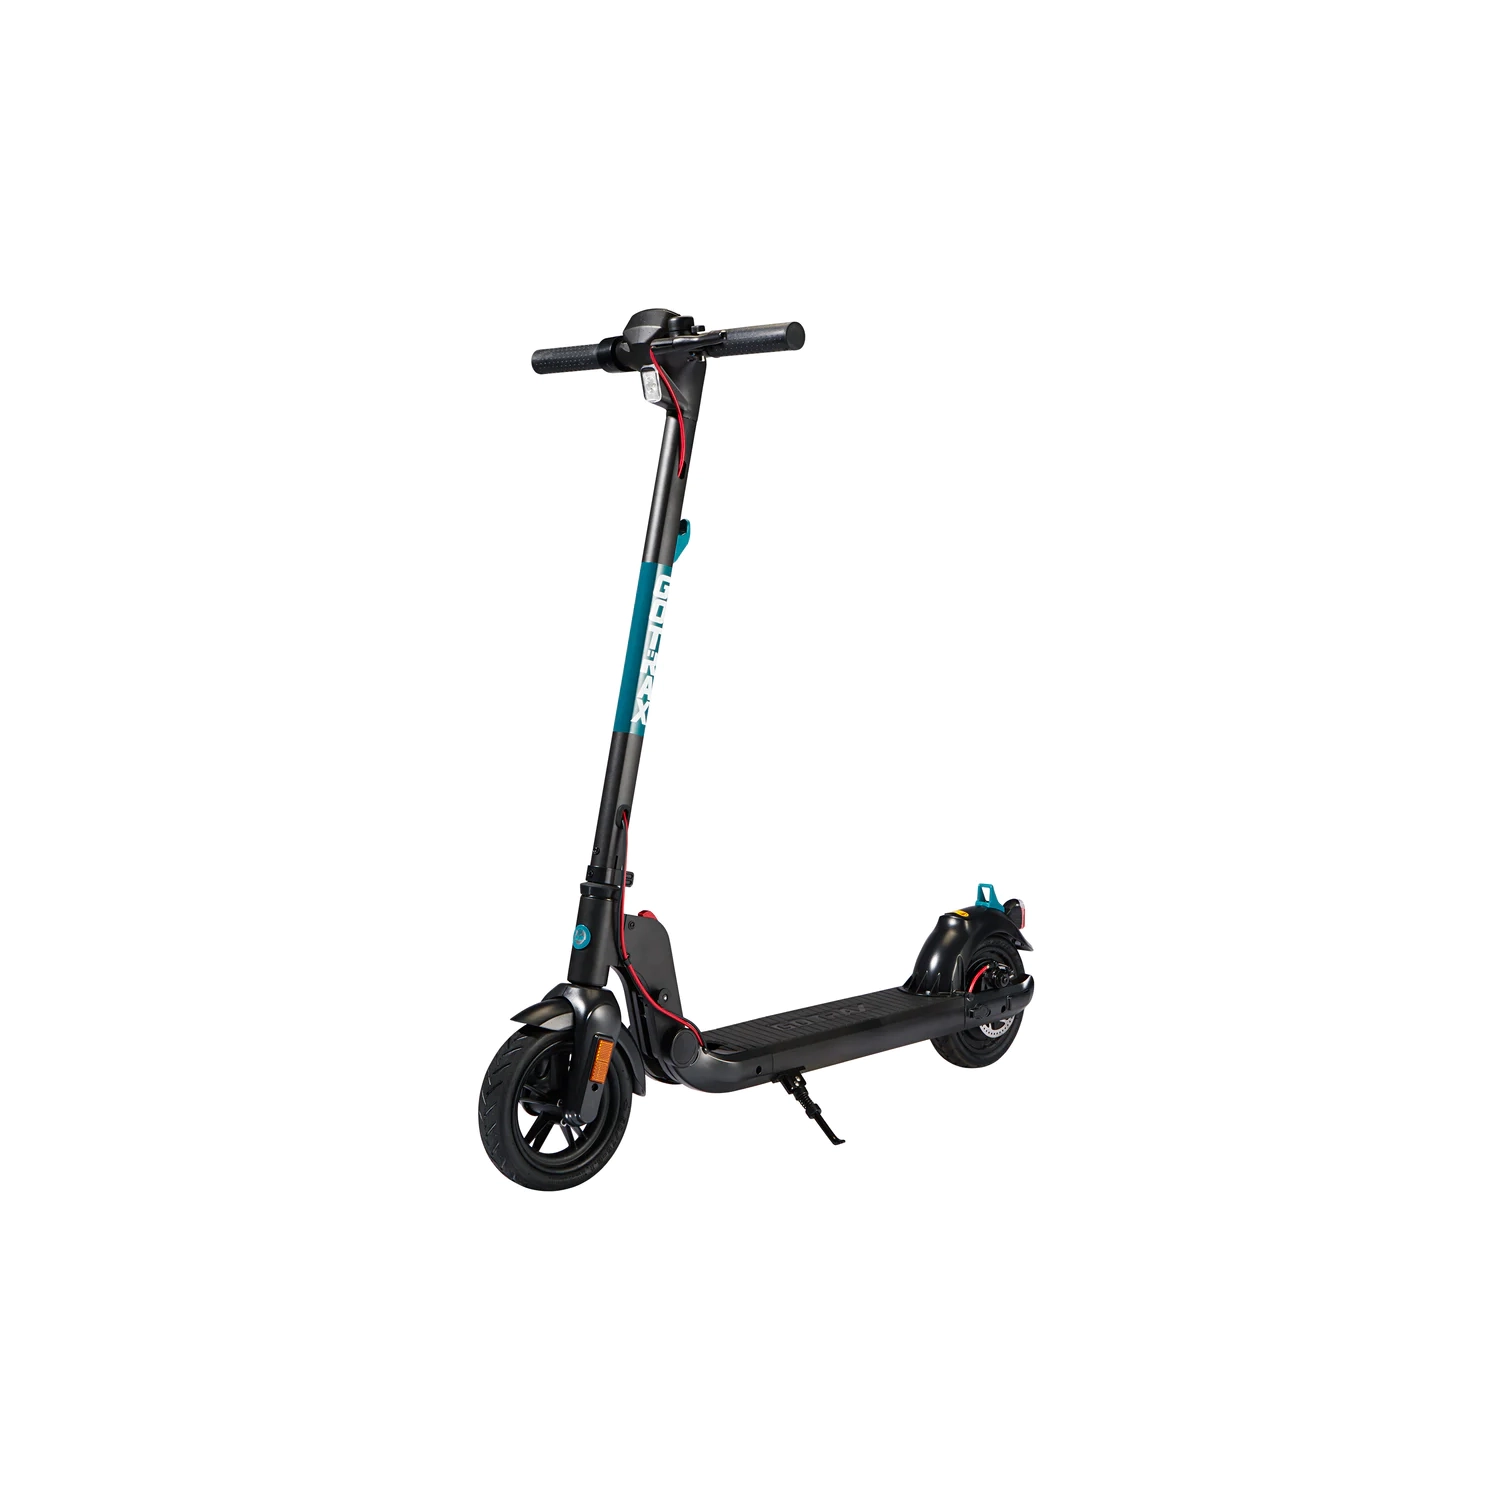 GoTrax Apex Electric Scooter (Black) - 25 km range, 25 km/h top speed, 4-5 hour charge, 250W motor, LED headlight, 8.5 inch pneumatic tires